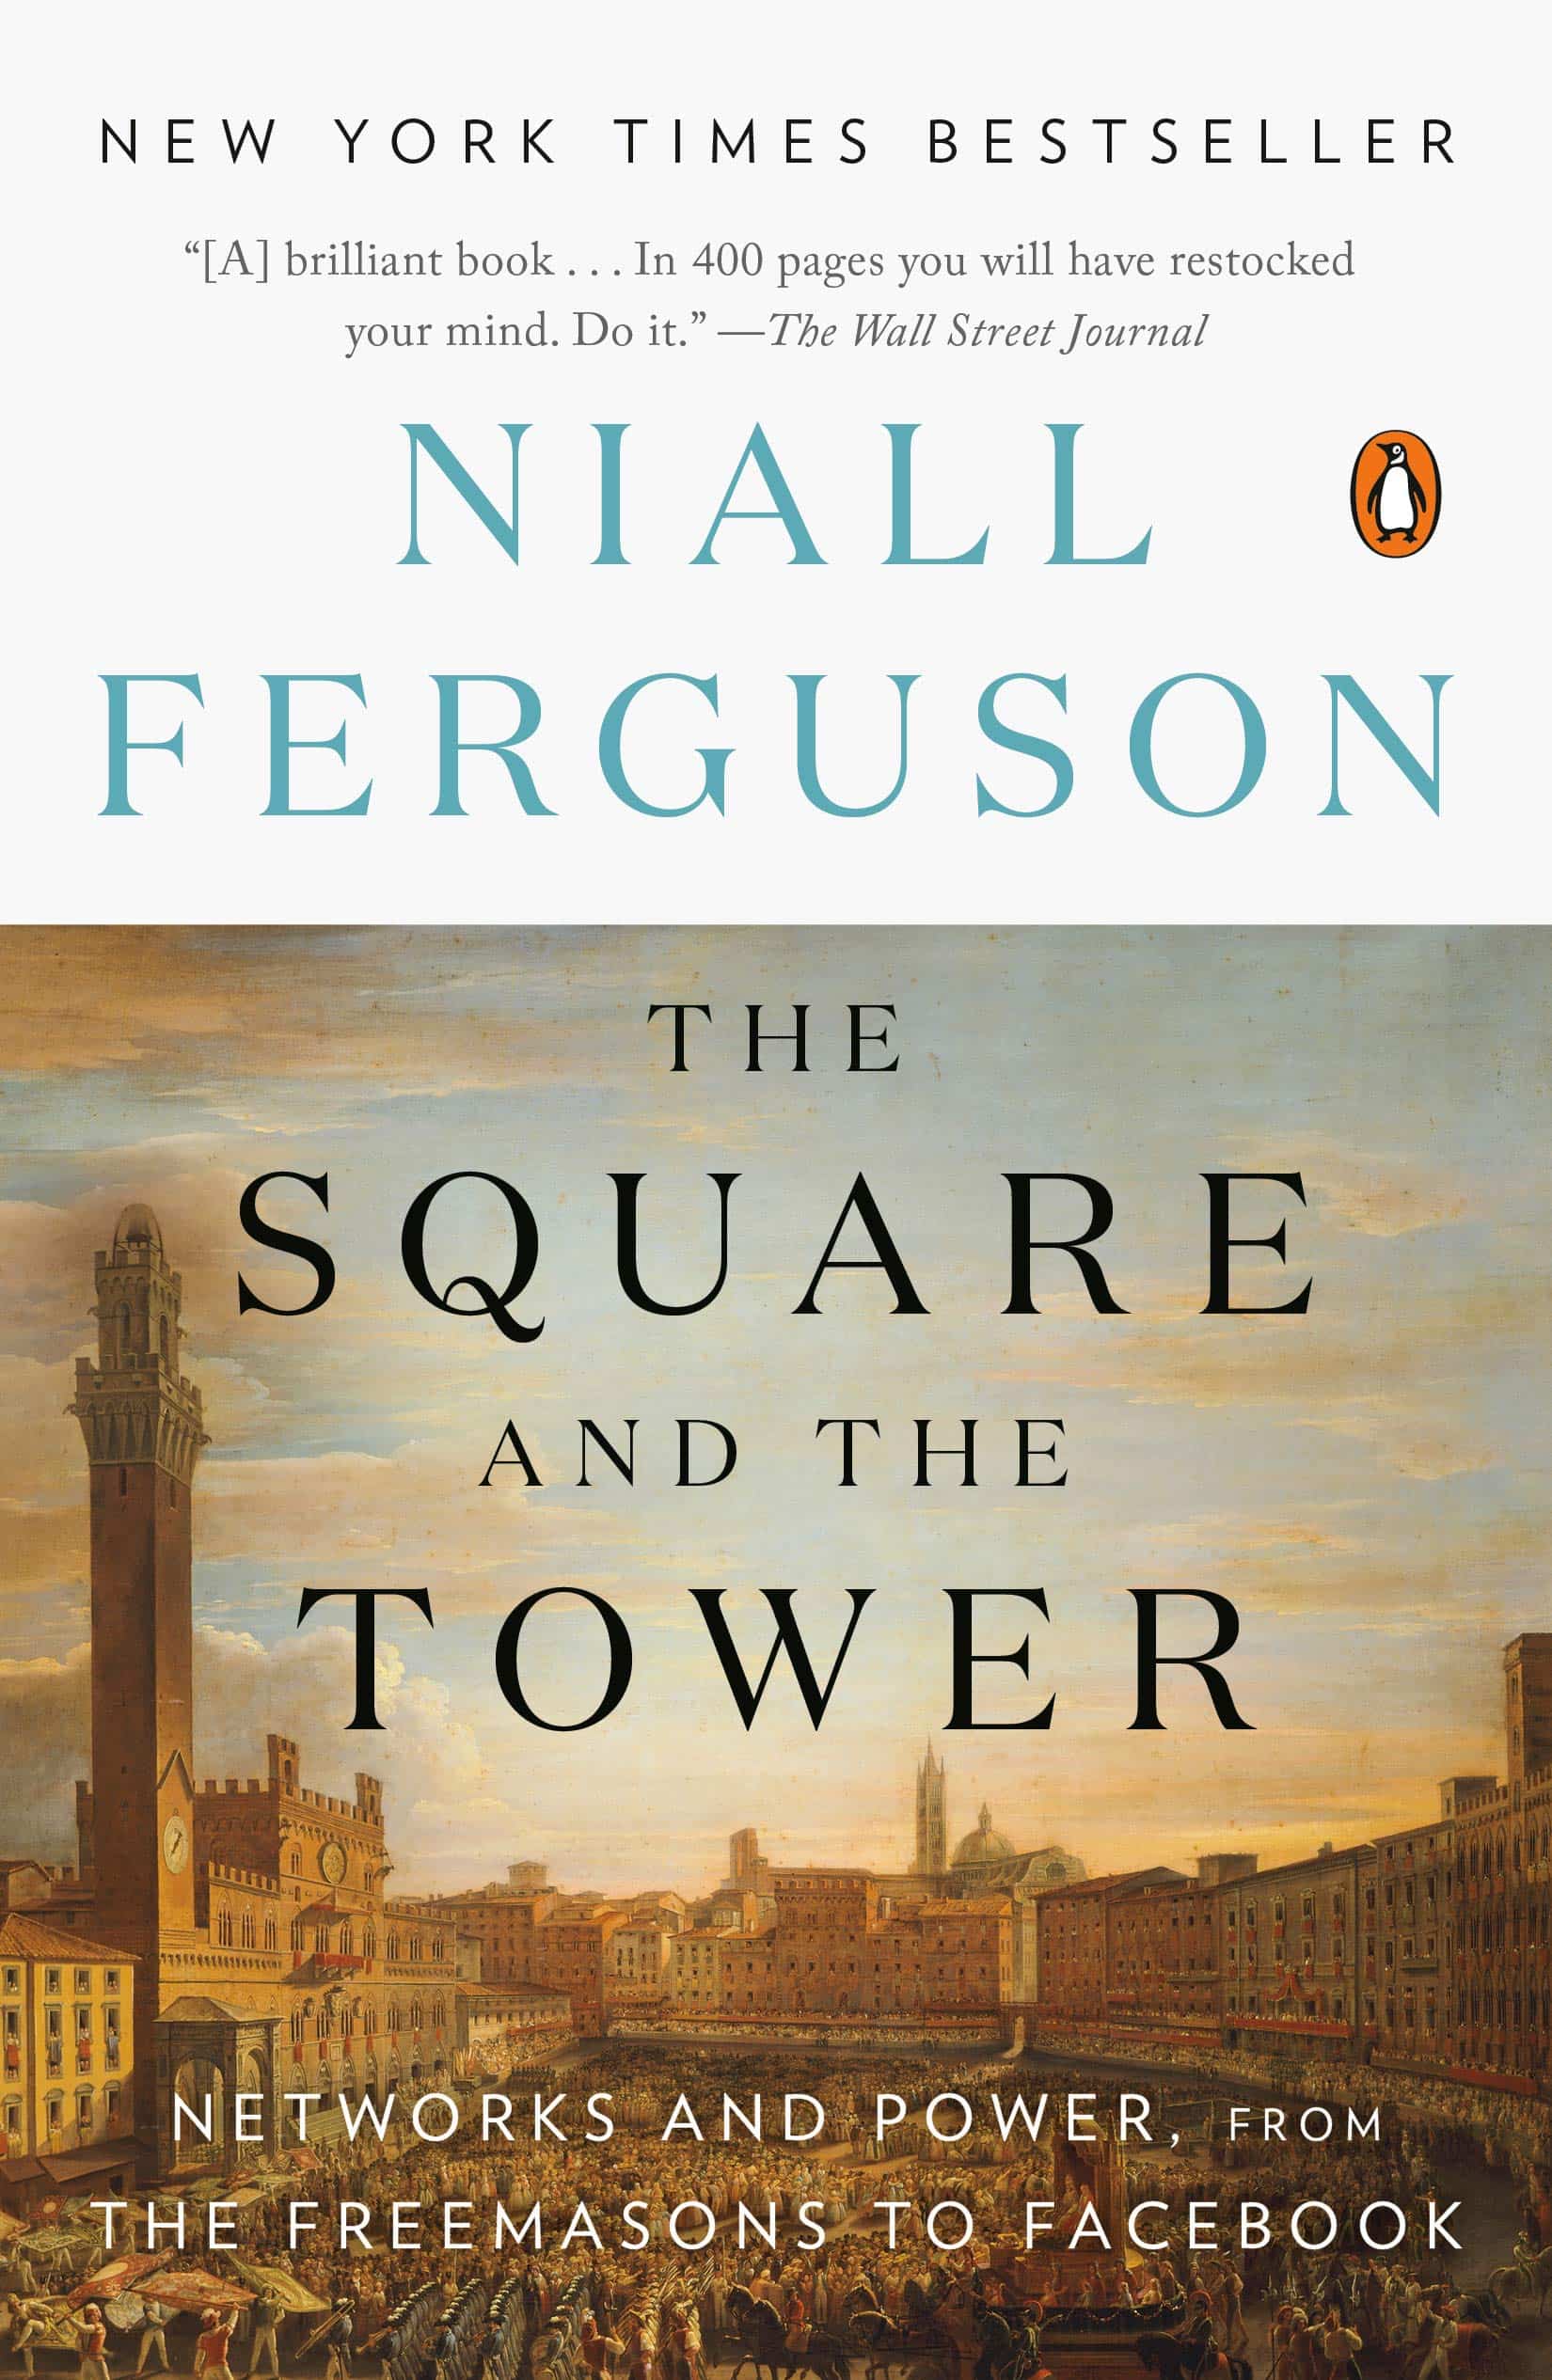 The cover of The Square and the Tower